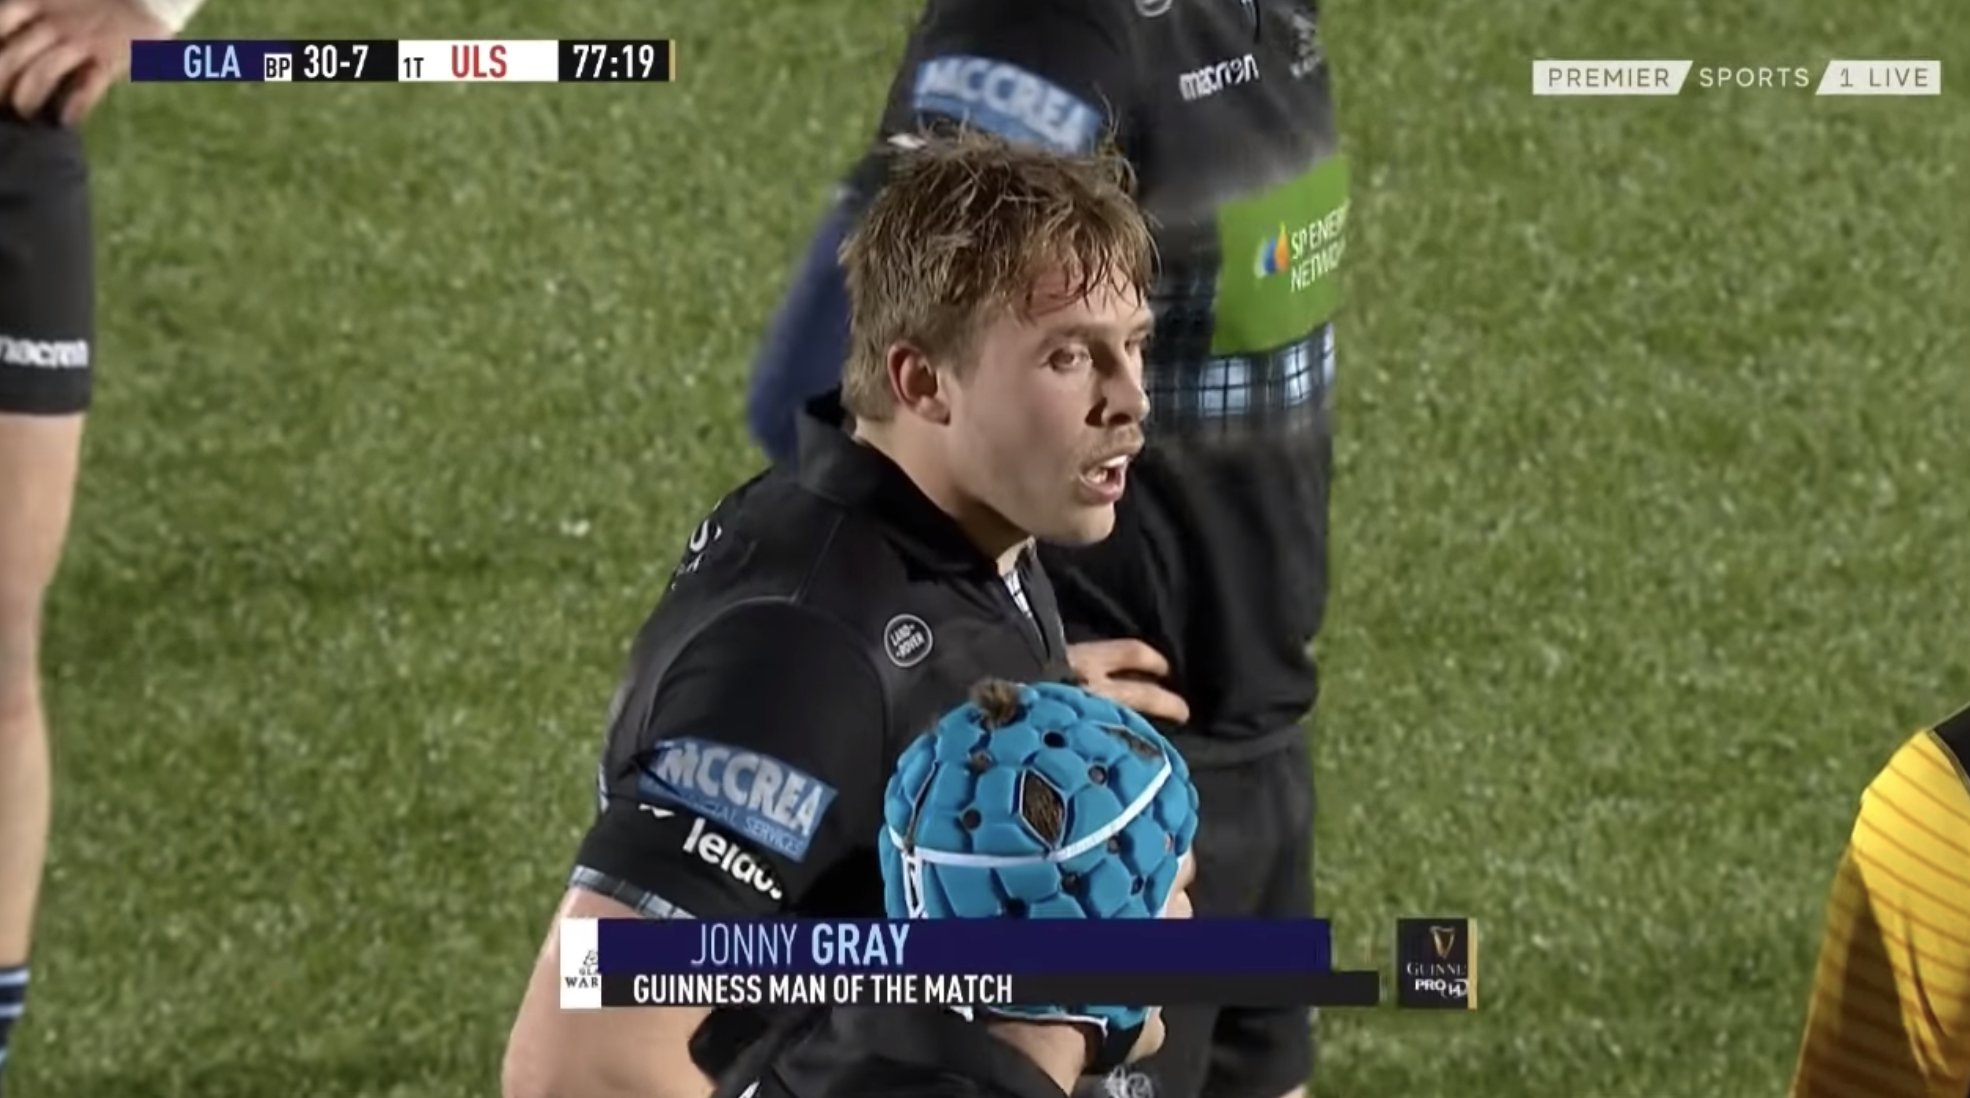 WATCH: Jonny Gray's GOLIATH performance this weekend against Ulster was something else